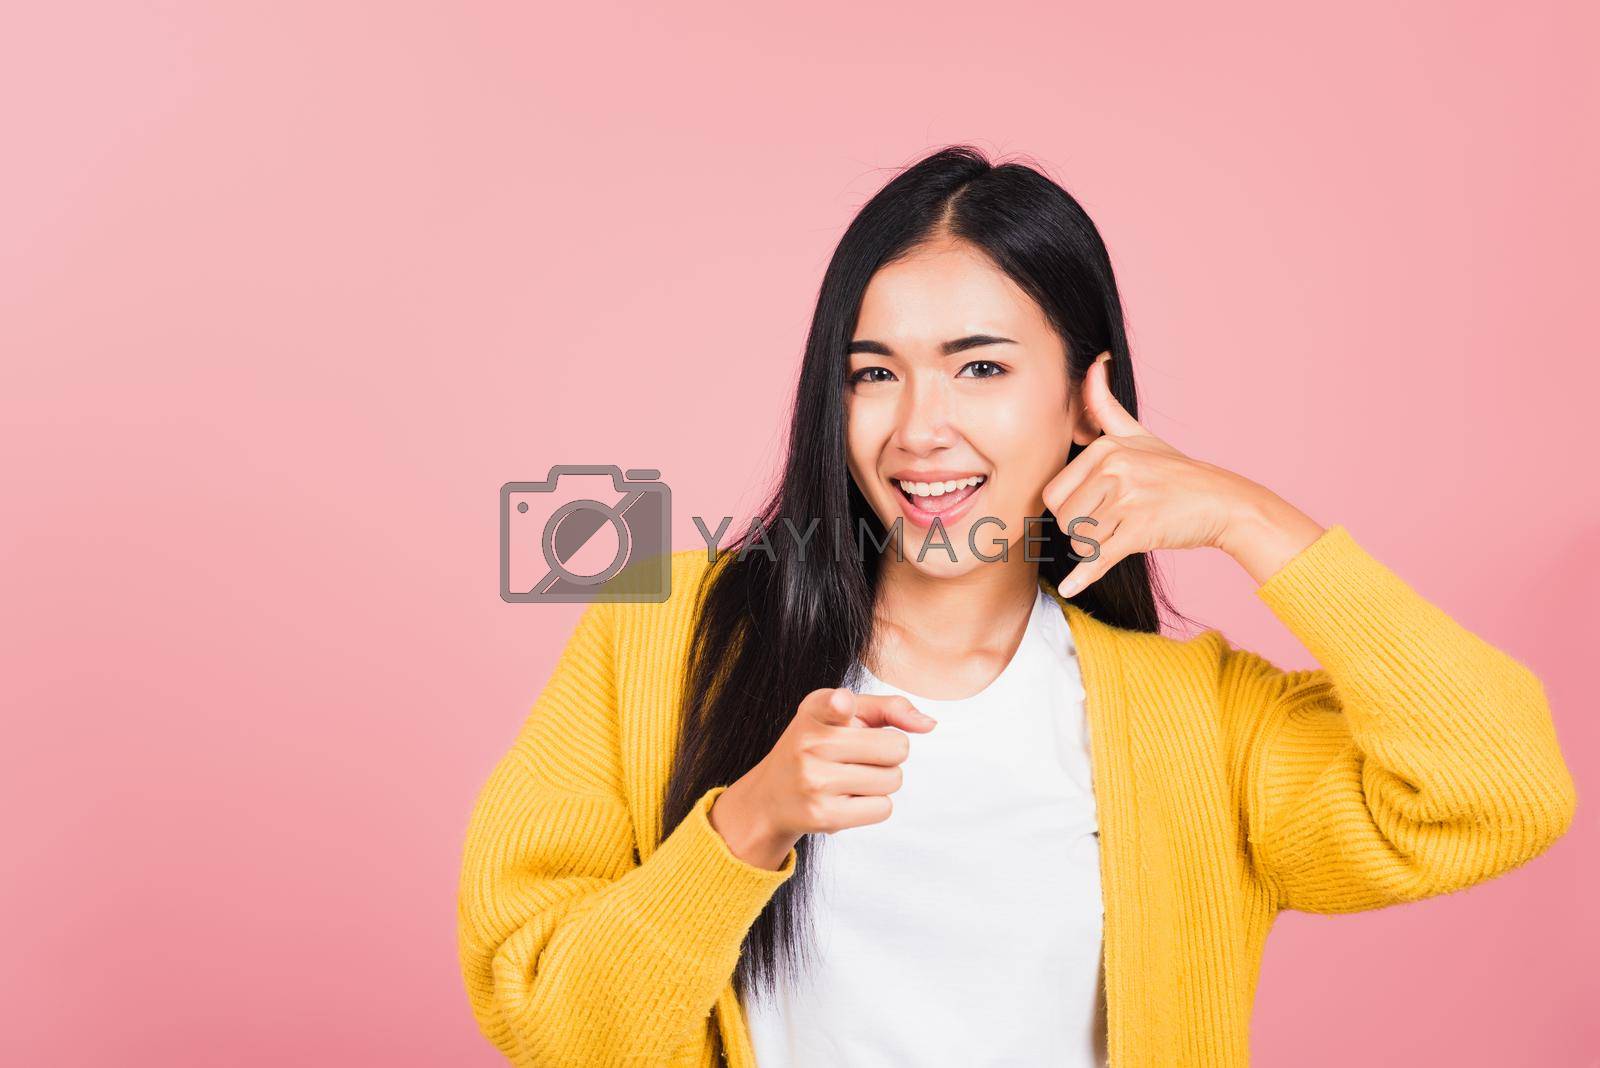 Royalty free image of woman smiling doing phone gesture with hand fingers on telephone and pointing by Sorapop